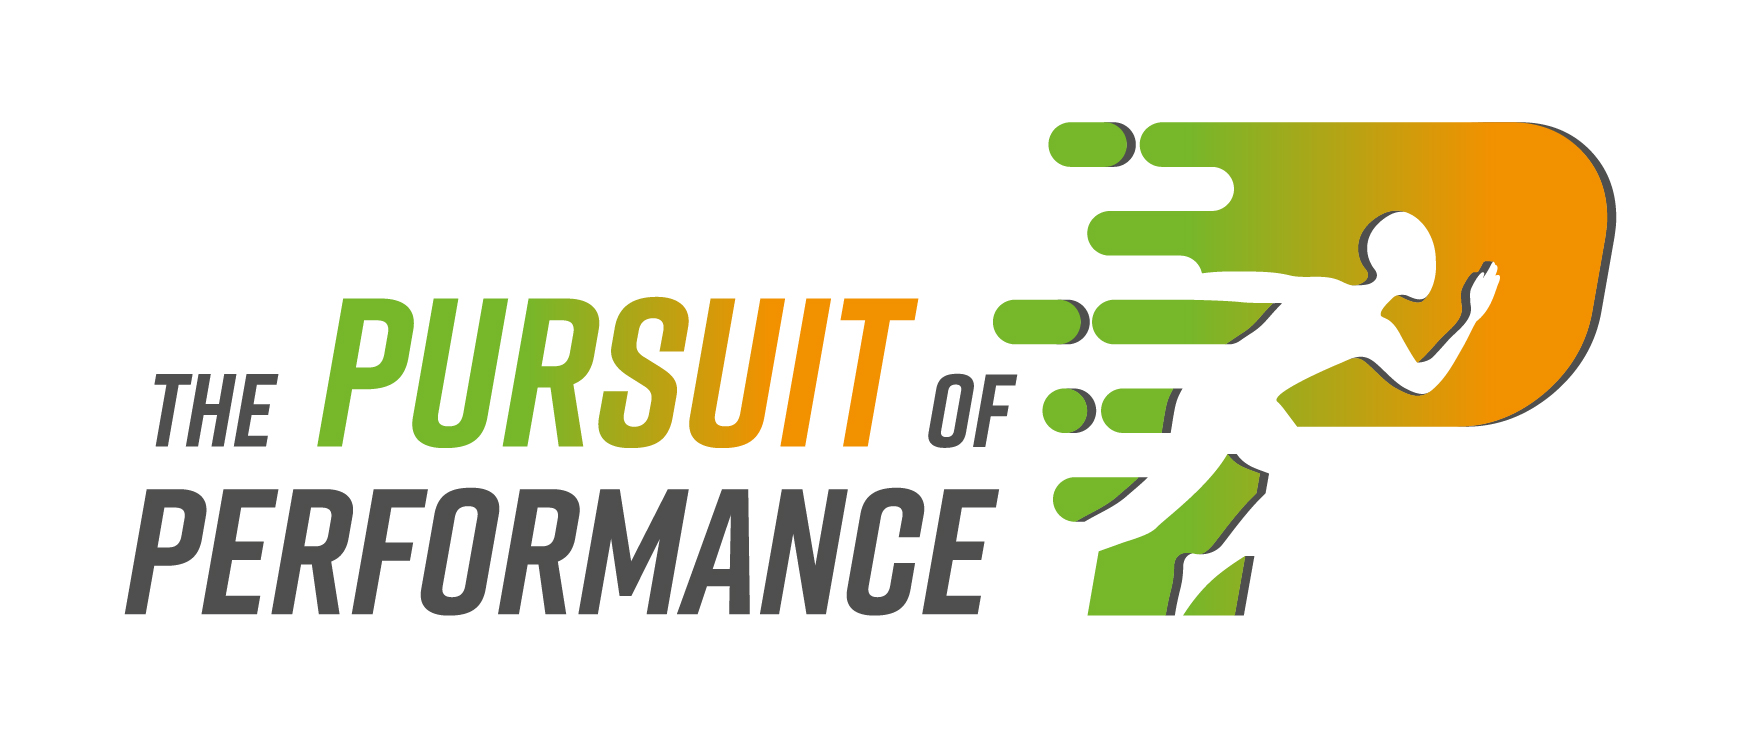 The Pursuit of Performance